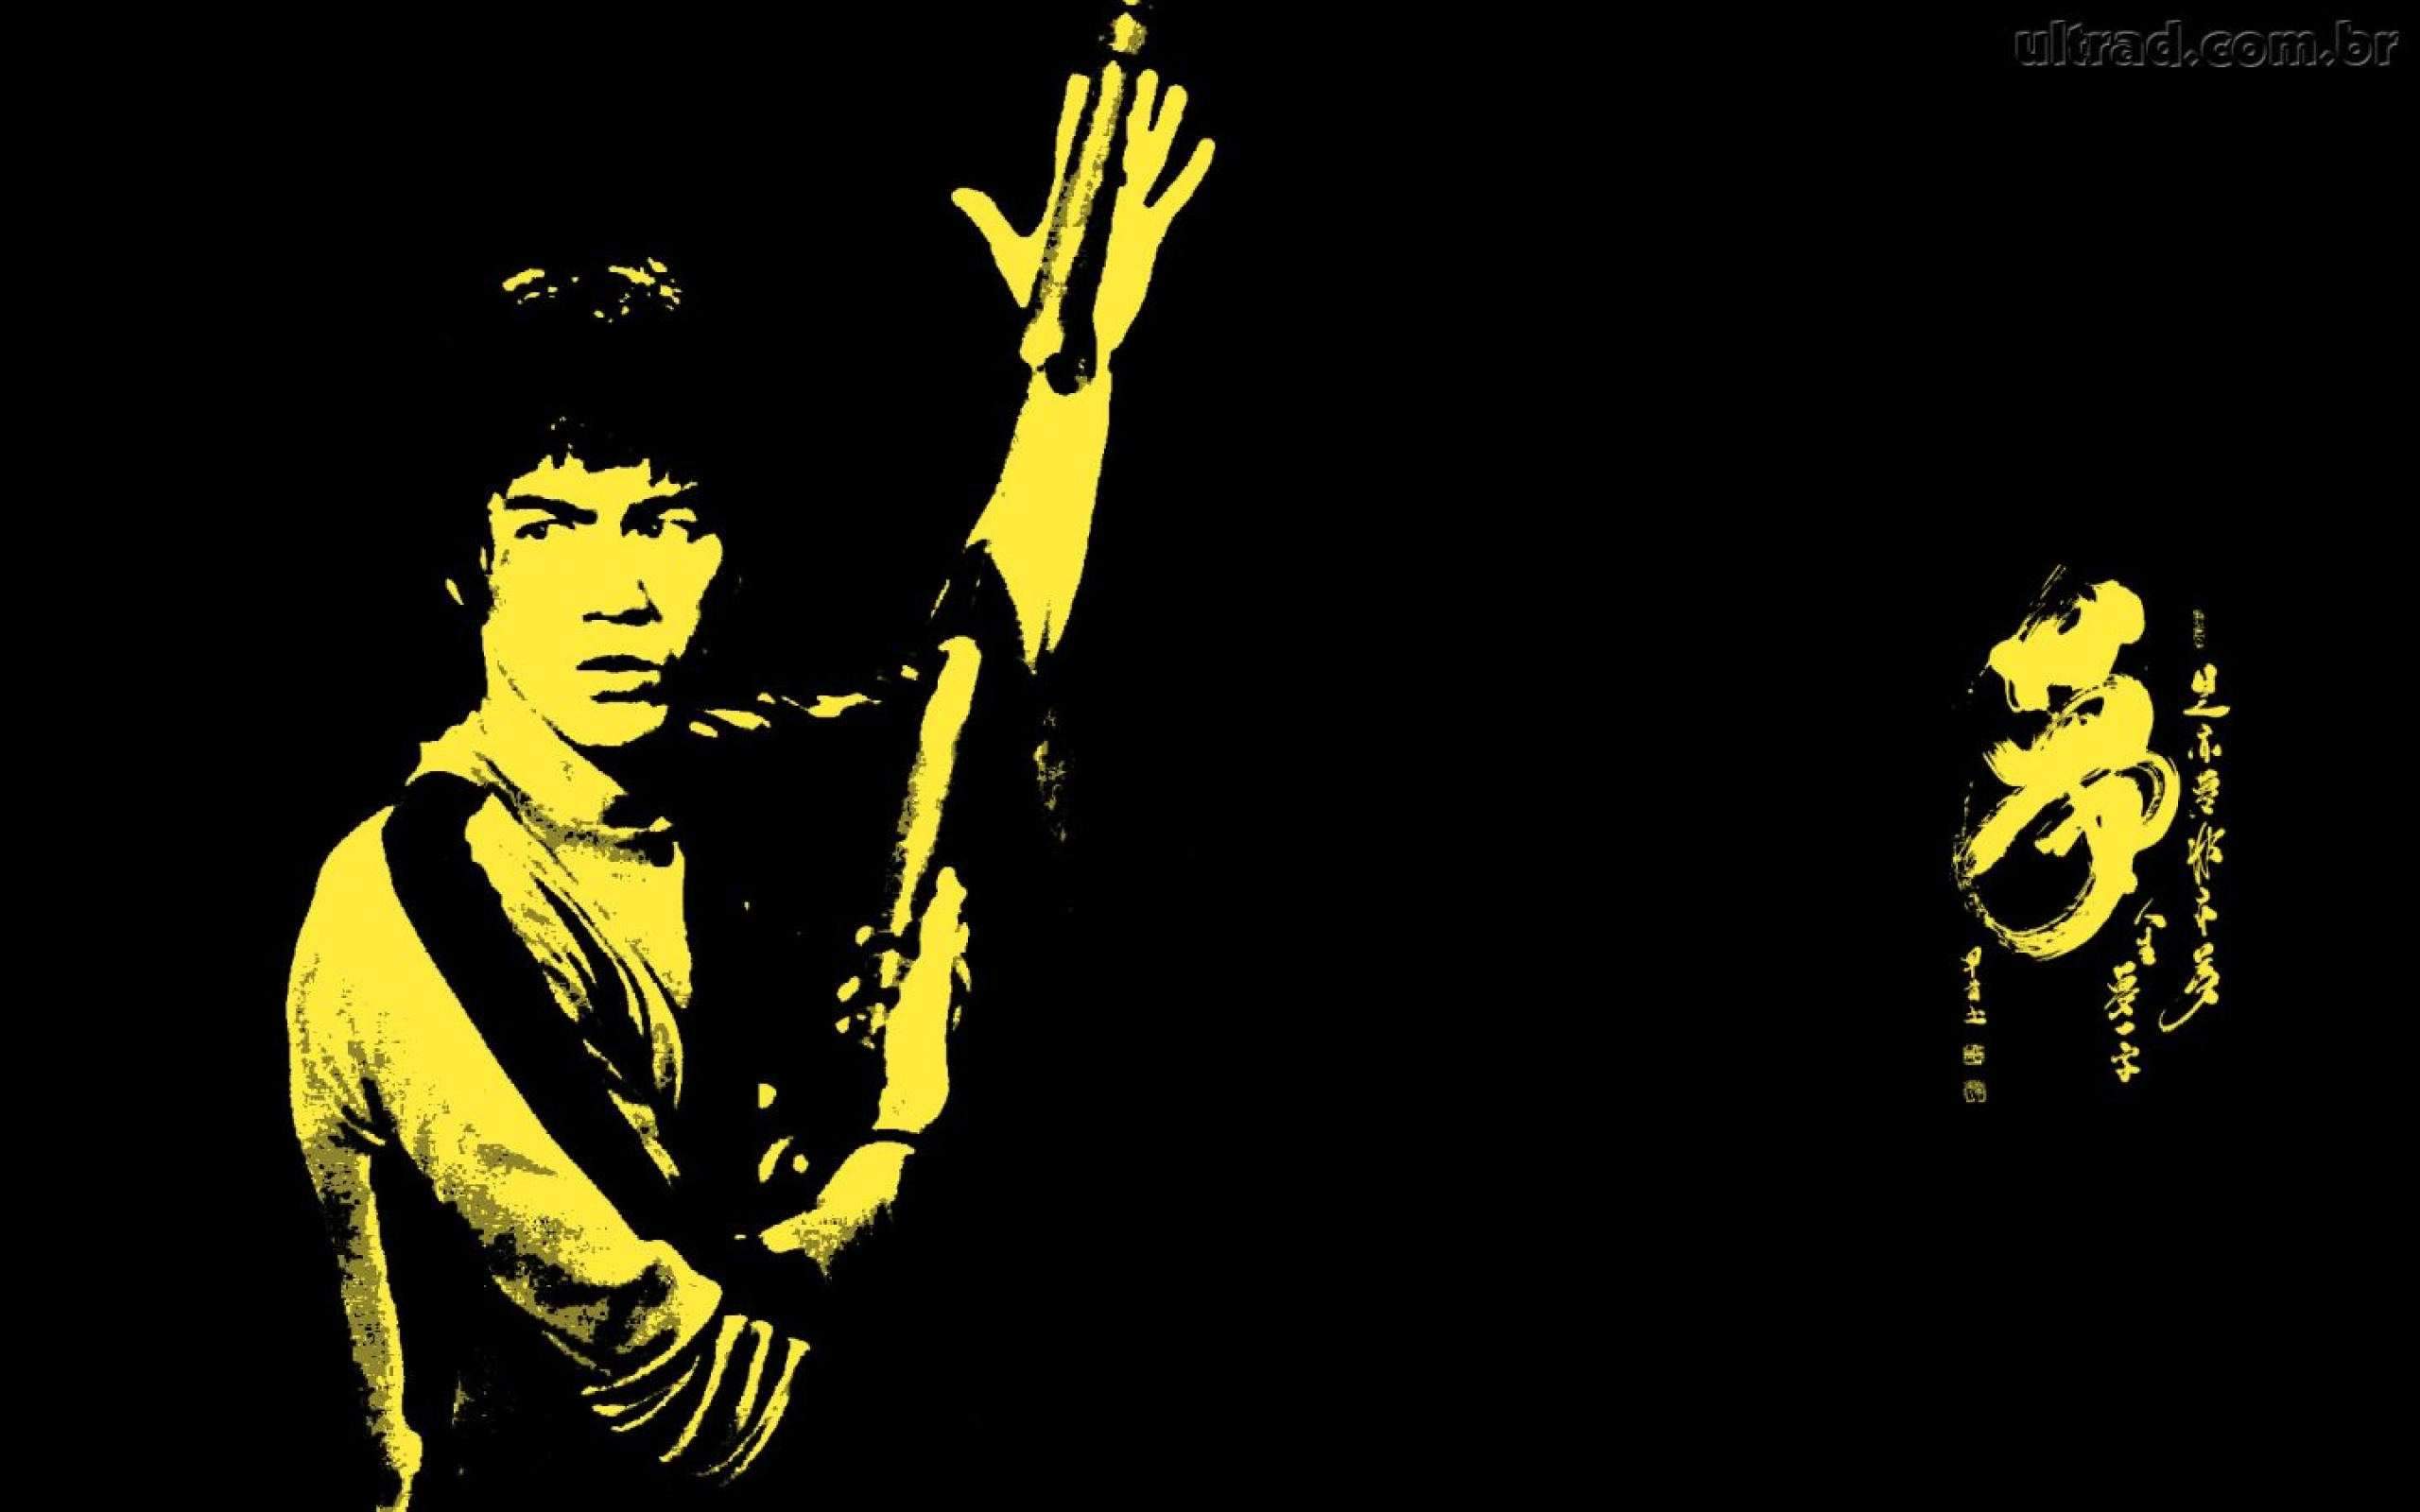 2560x1600 Bruce Lee Abstract Hd Wallpaper 2560x1600 Resolution Wallpaper Hd Celebrities 4k Wallpapers Images Photos And Background Wallpapers Den